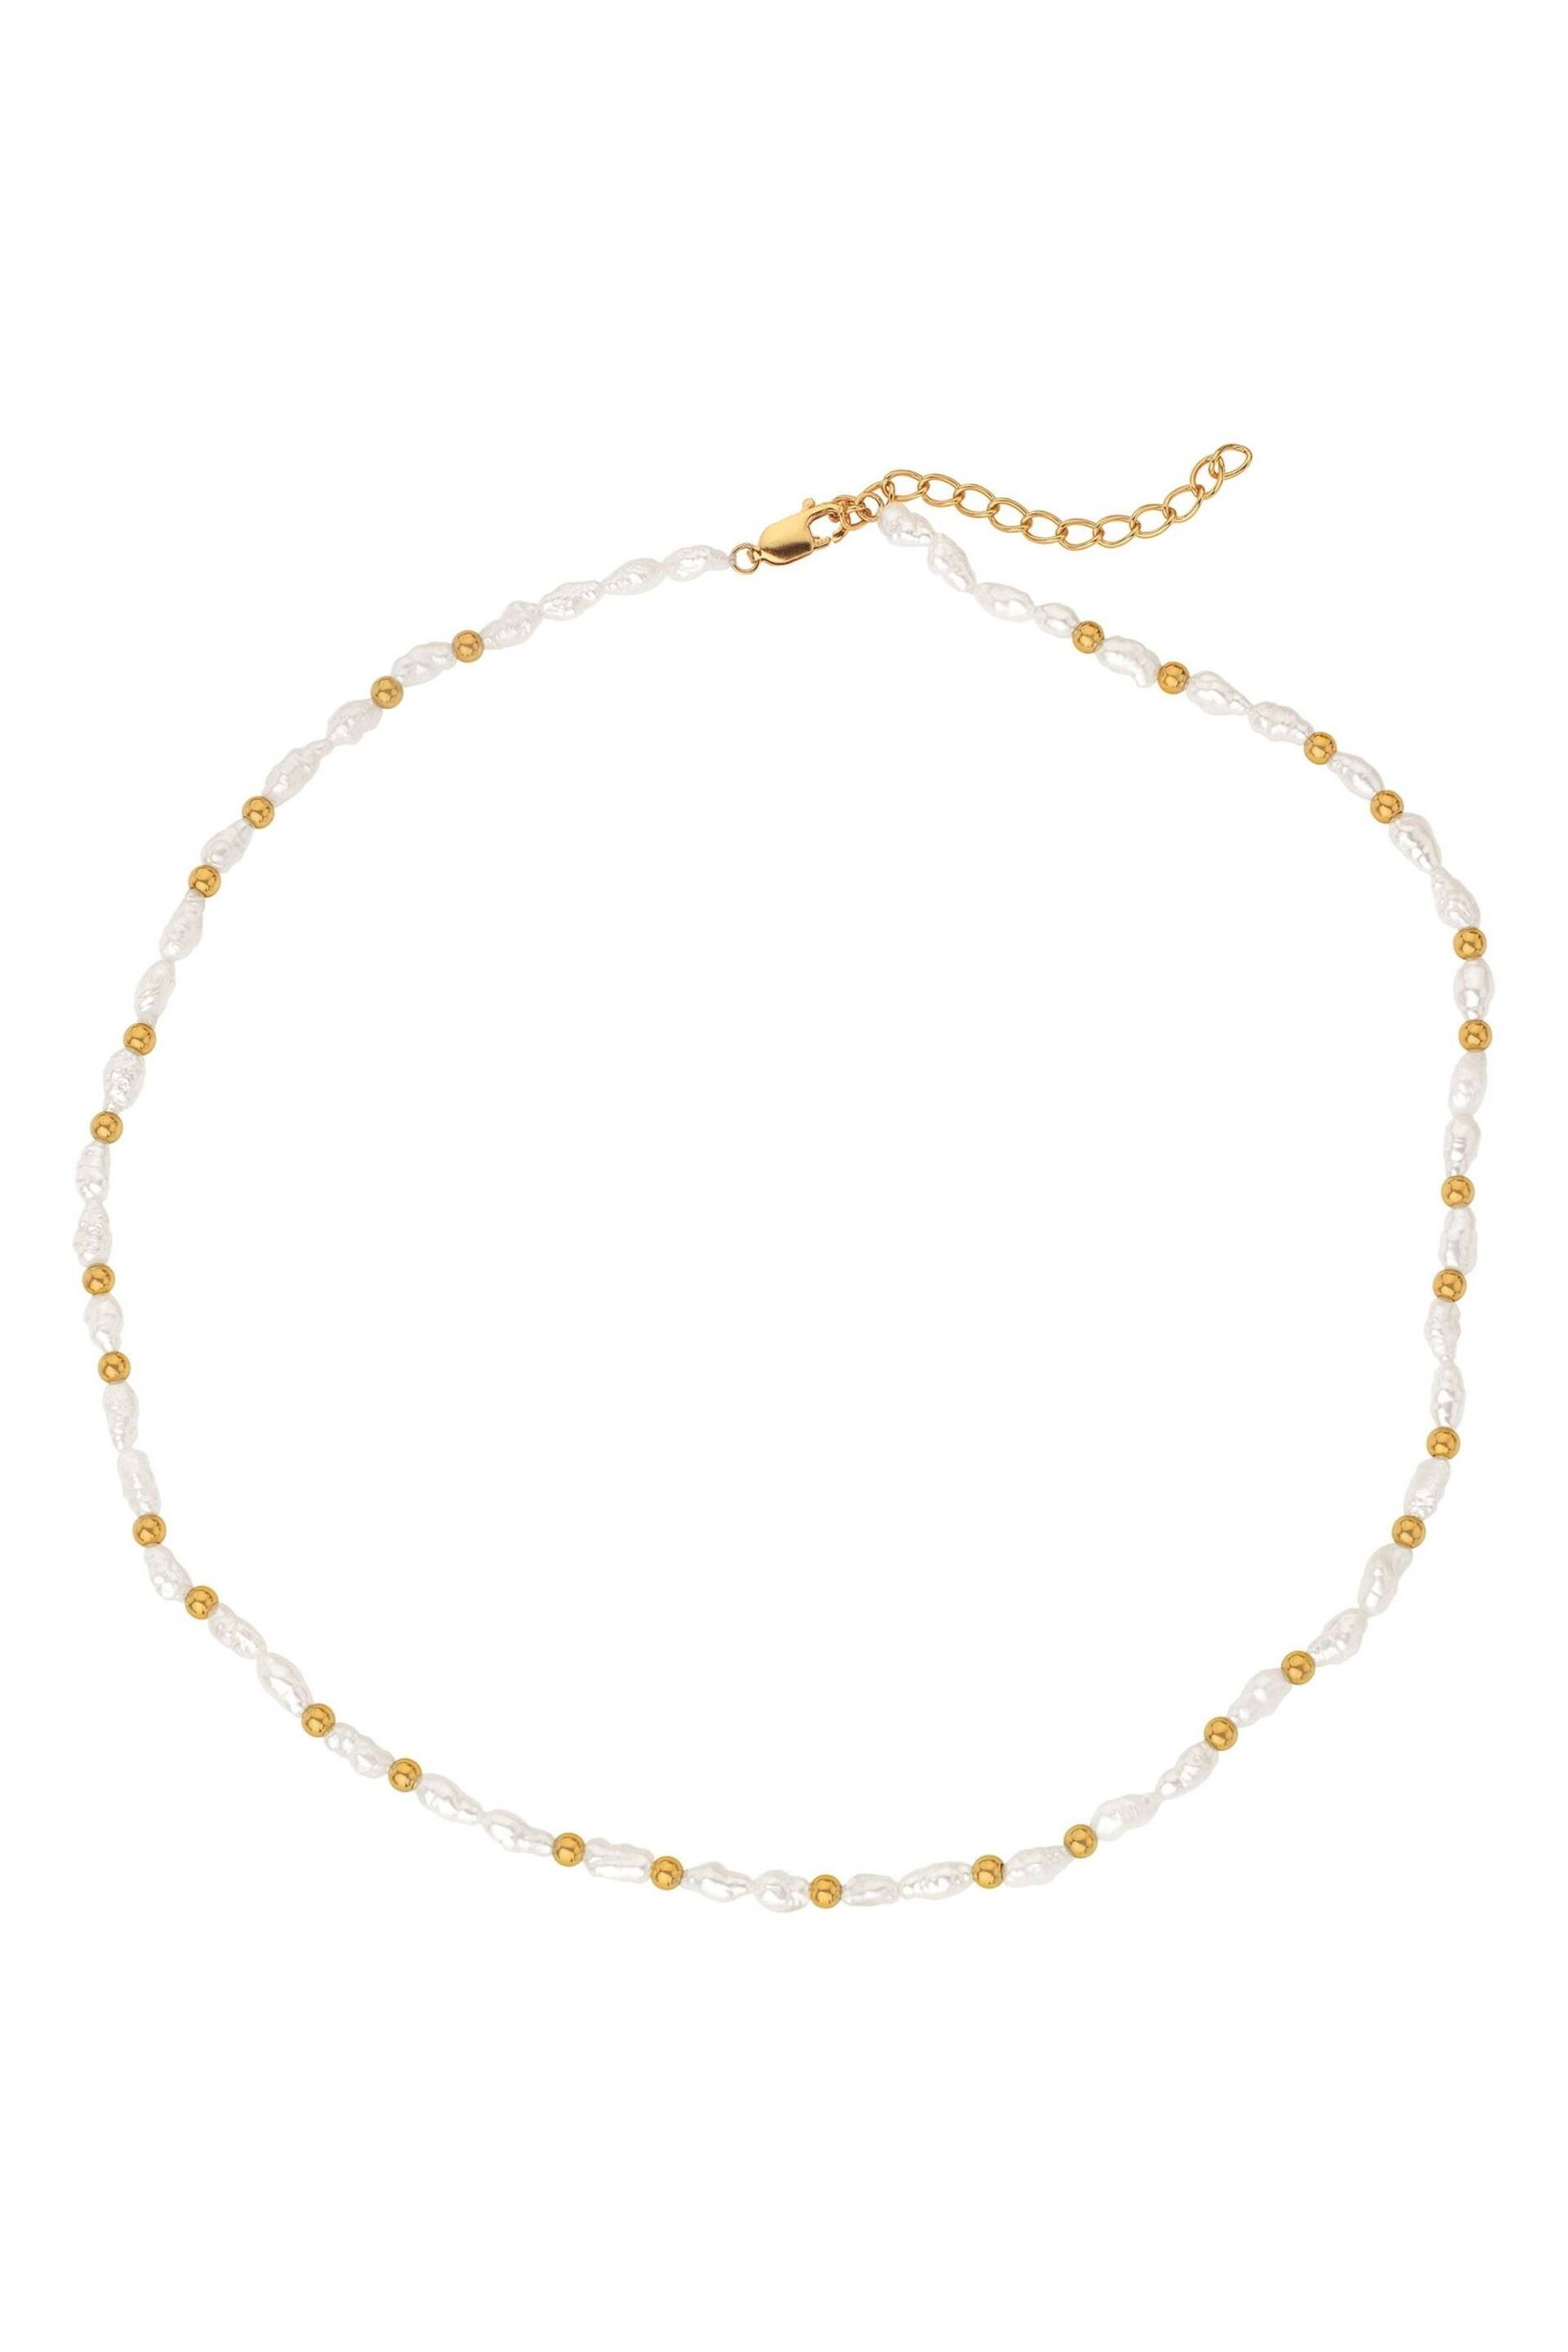 Hot Diamonds Gold Tone Calm Pearl Necklace - Image 2 of 3